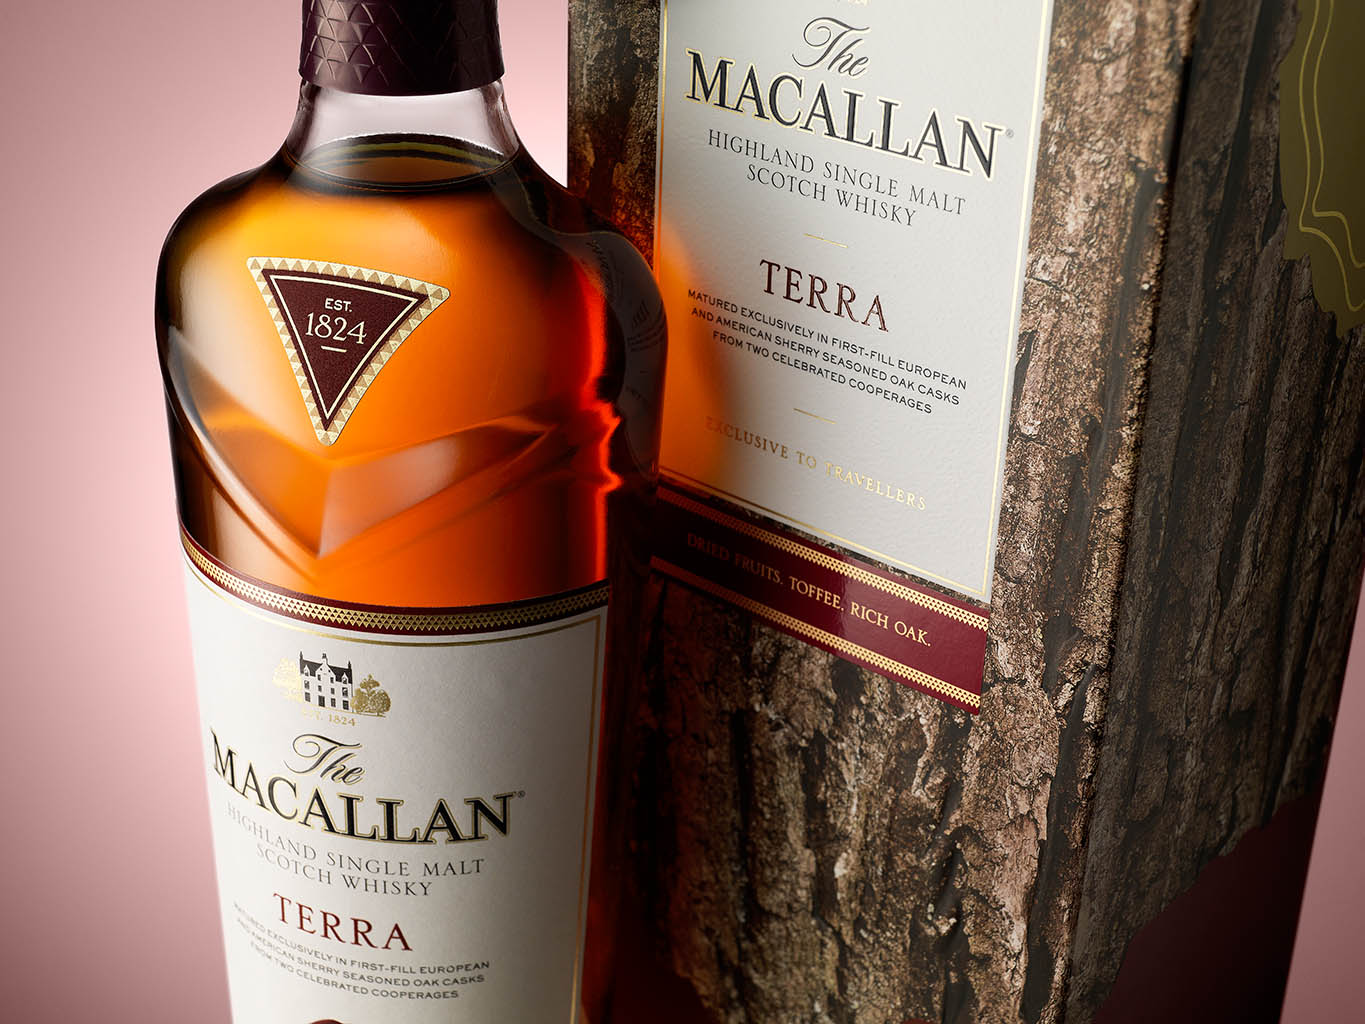 Packshot Factory - Coloured background - Macallan whisky bottle and box set